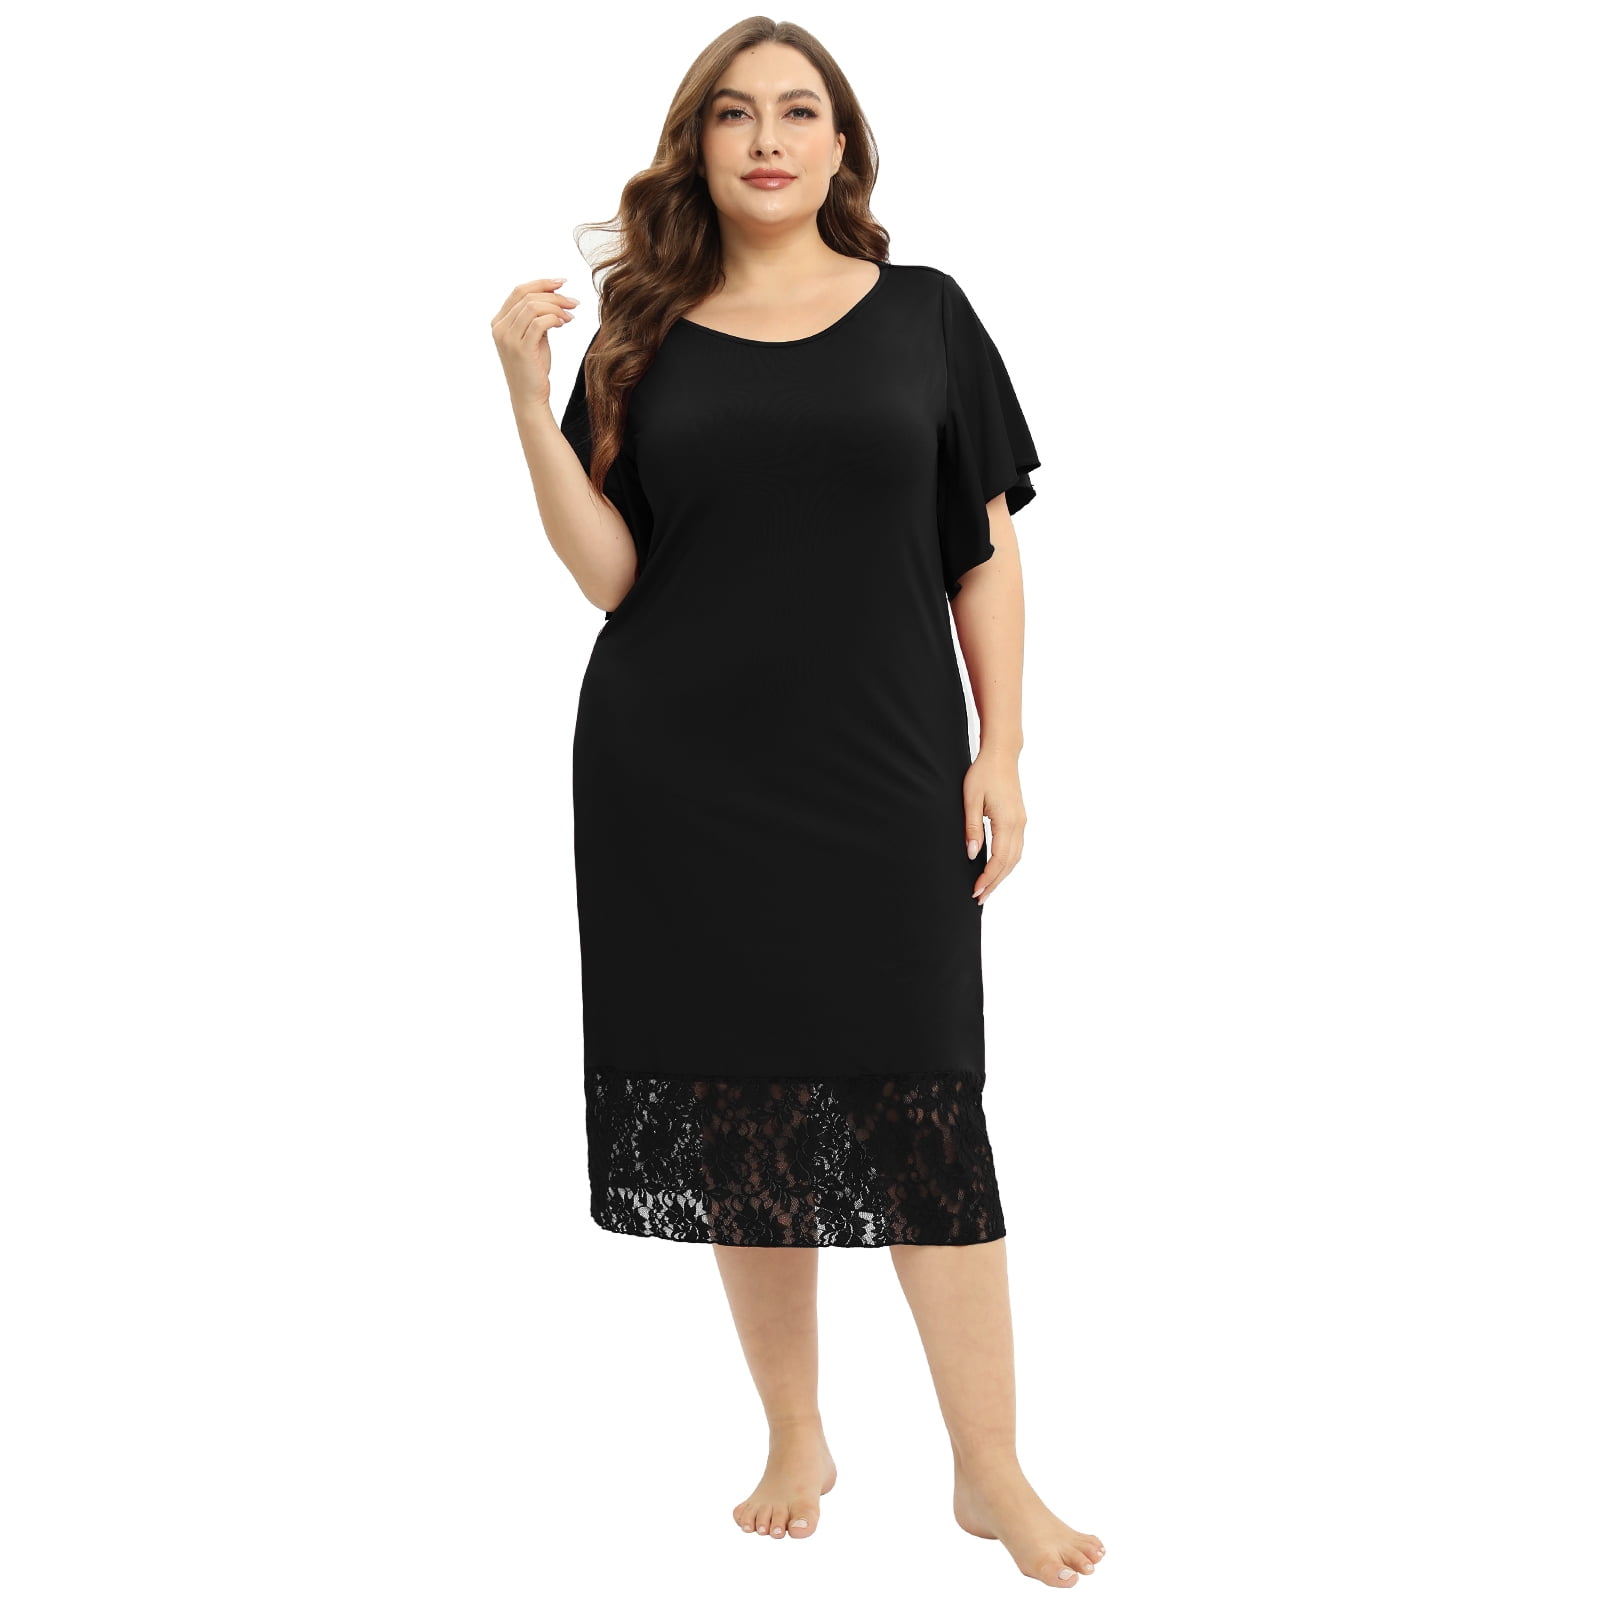 Miyanuby Plus Size Nightgown for Womens Short Sleeve Long Nightdress ...